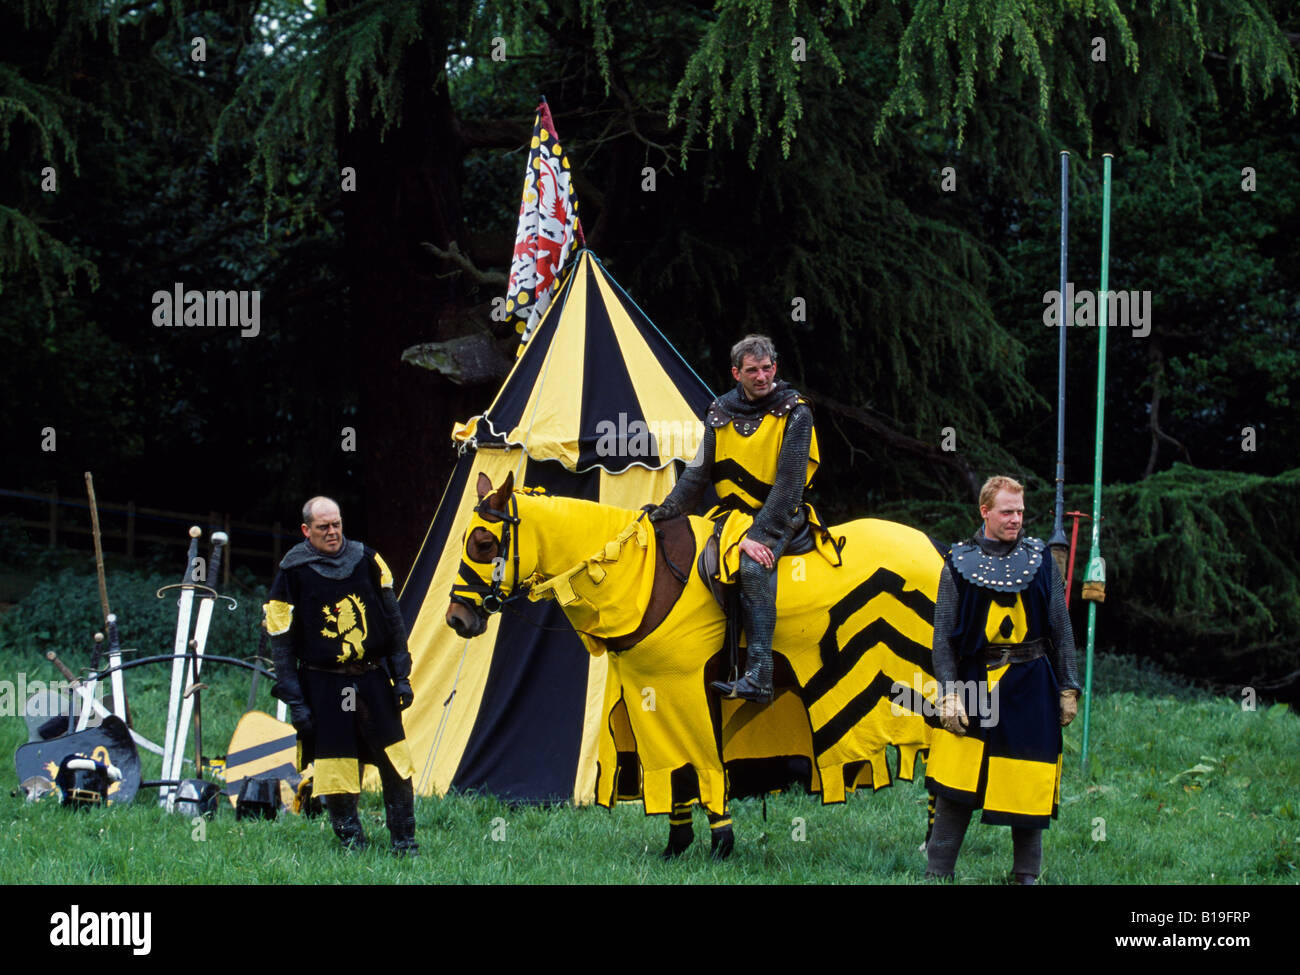 England, Leicestershire, Belvoir Castle. A jousting tournament at the english stately home of Belvoir Castle. Stock Photo